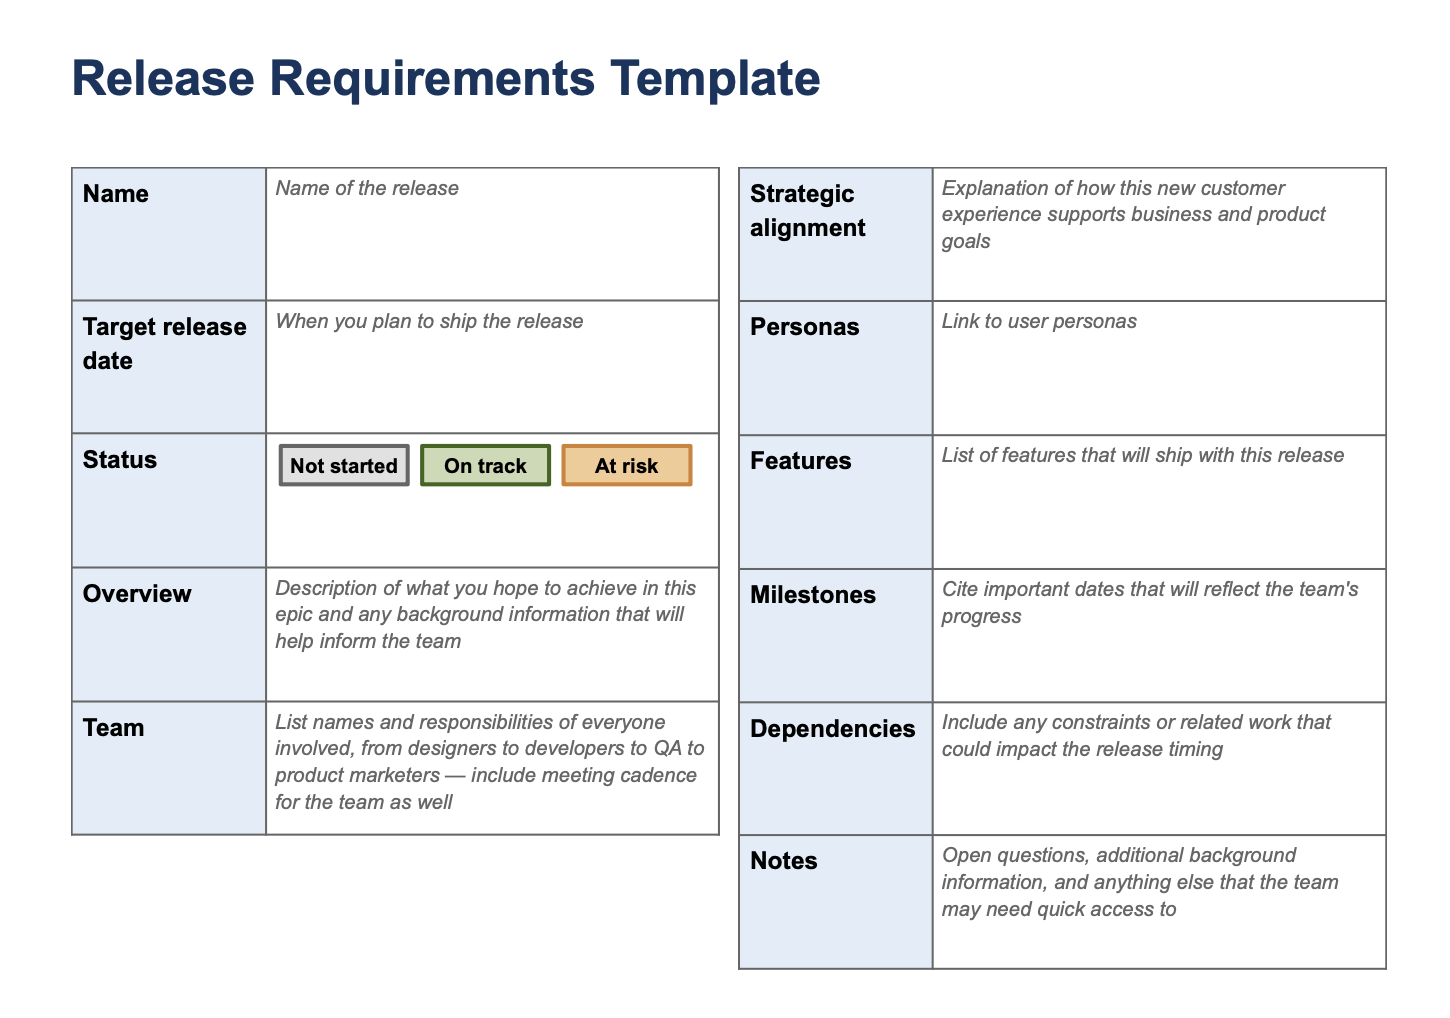 Release requirements template